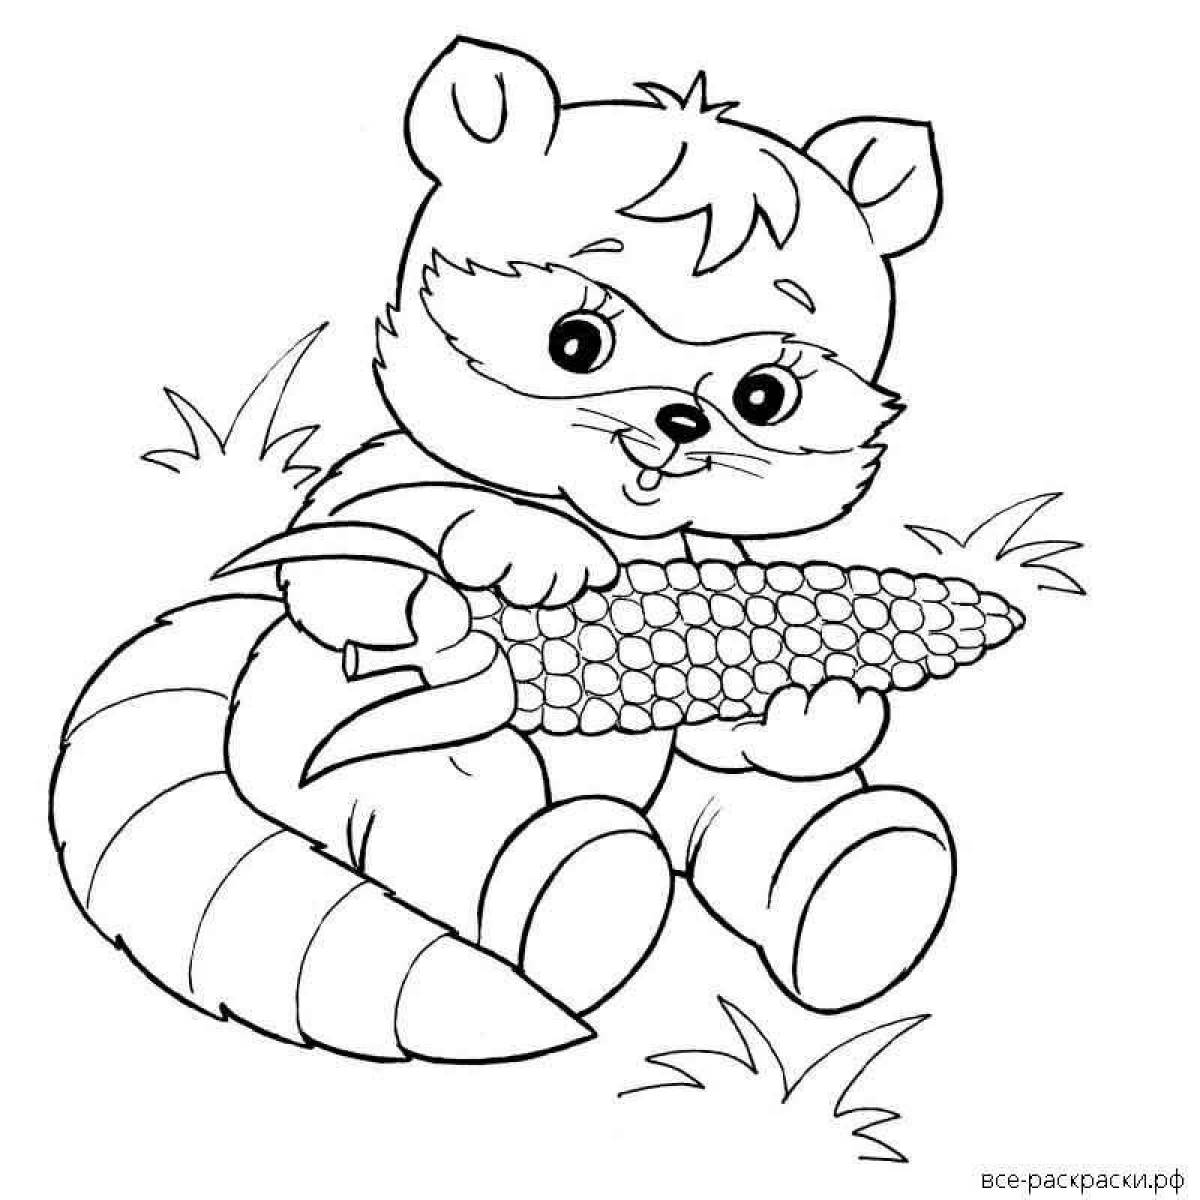 Color-frenzy raccoon coloring page для детей